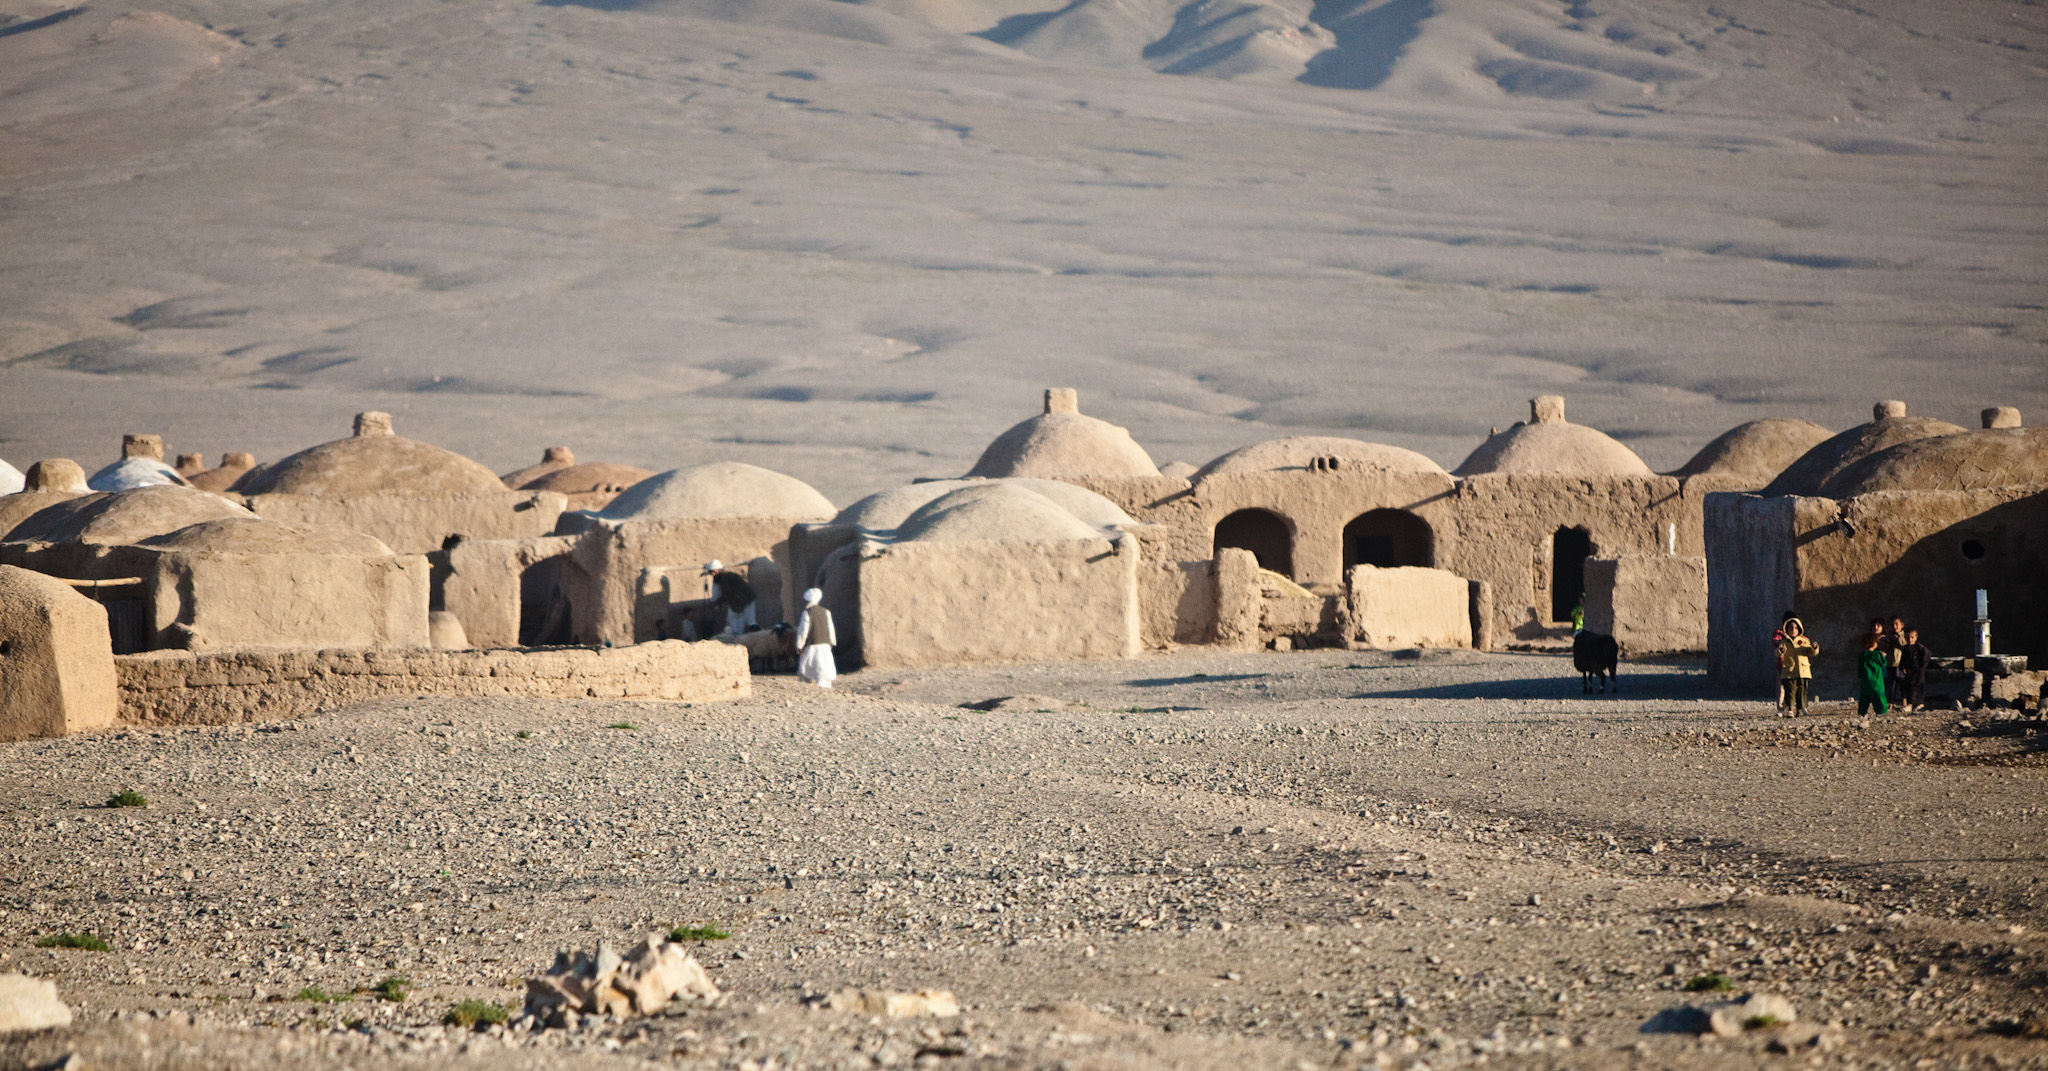 The Price of Inequality: The Dangerous Rural-Urban Divide in Afghanistan